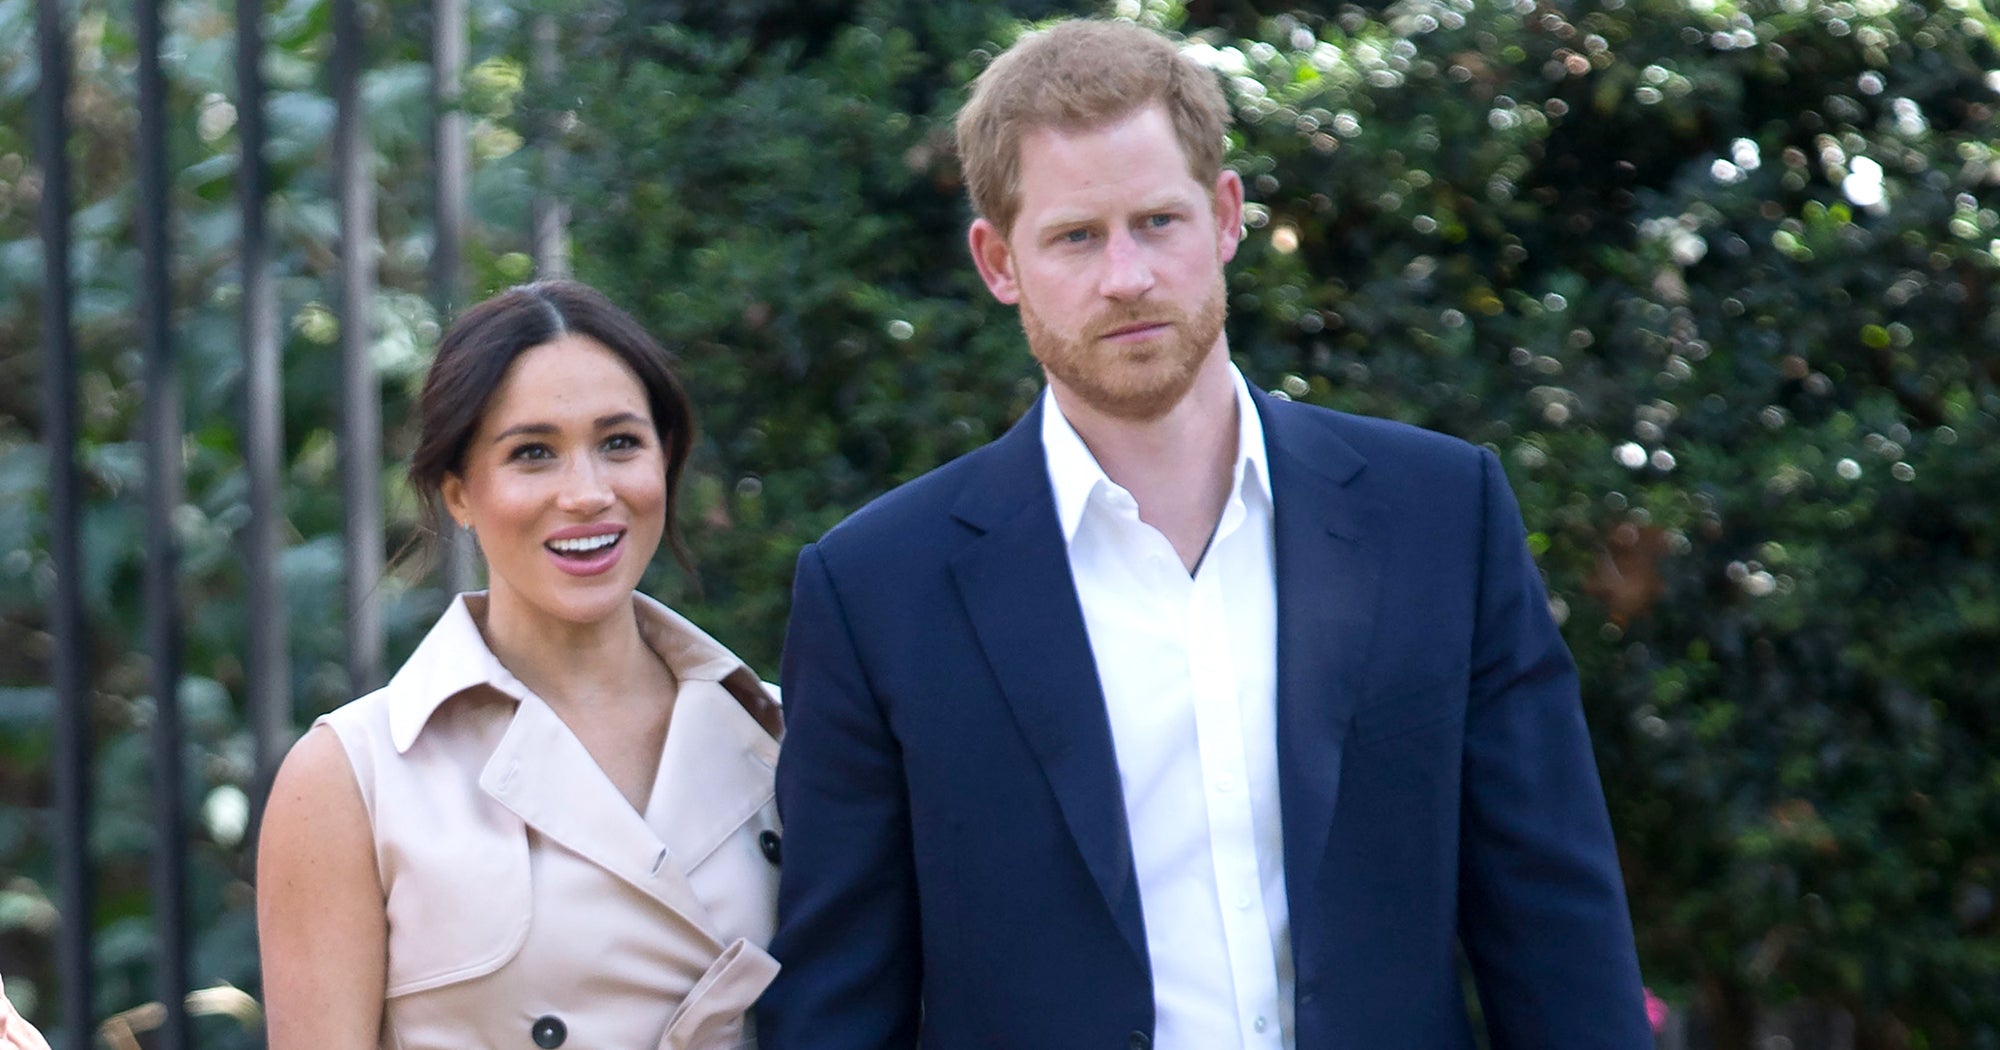 Travel To Africa Like Meghan Markle And Prince Harry